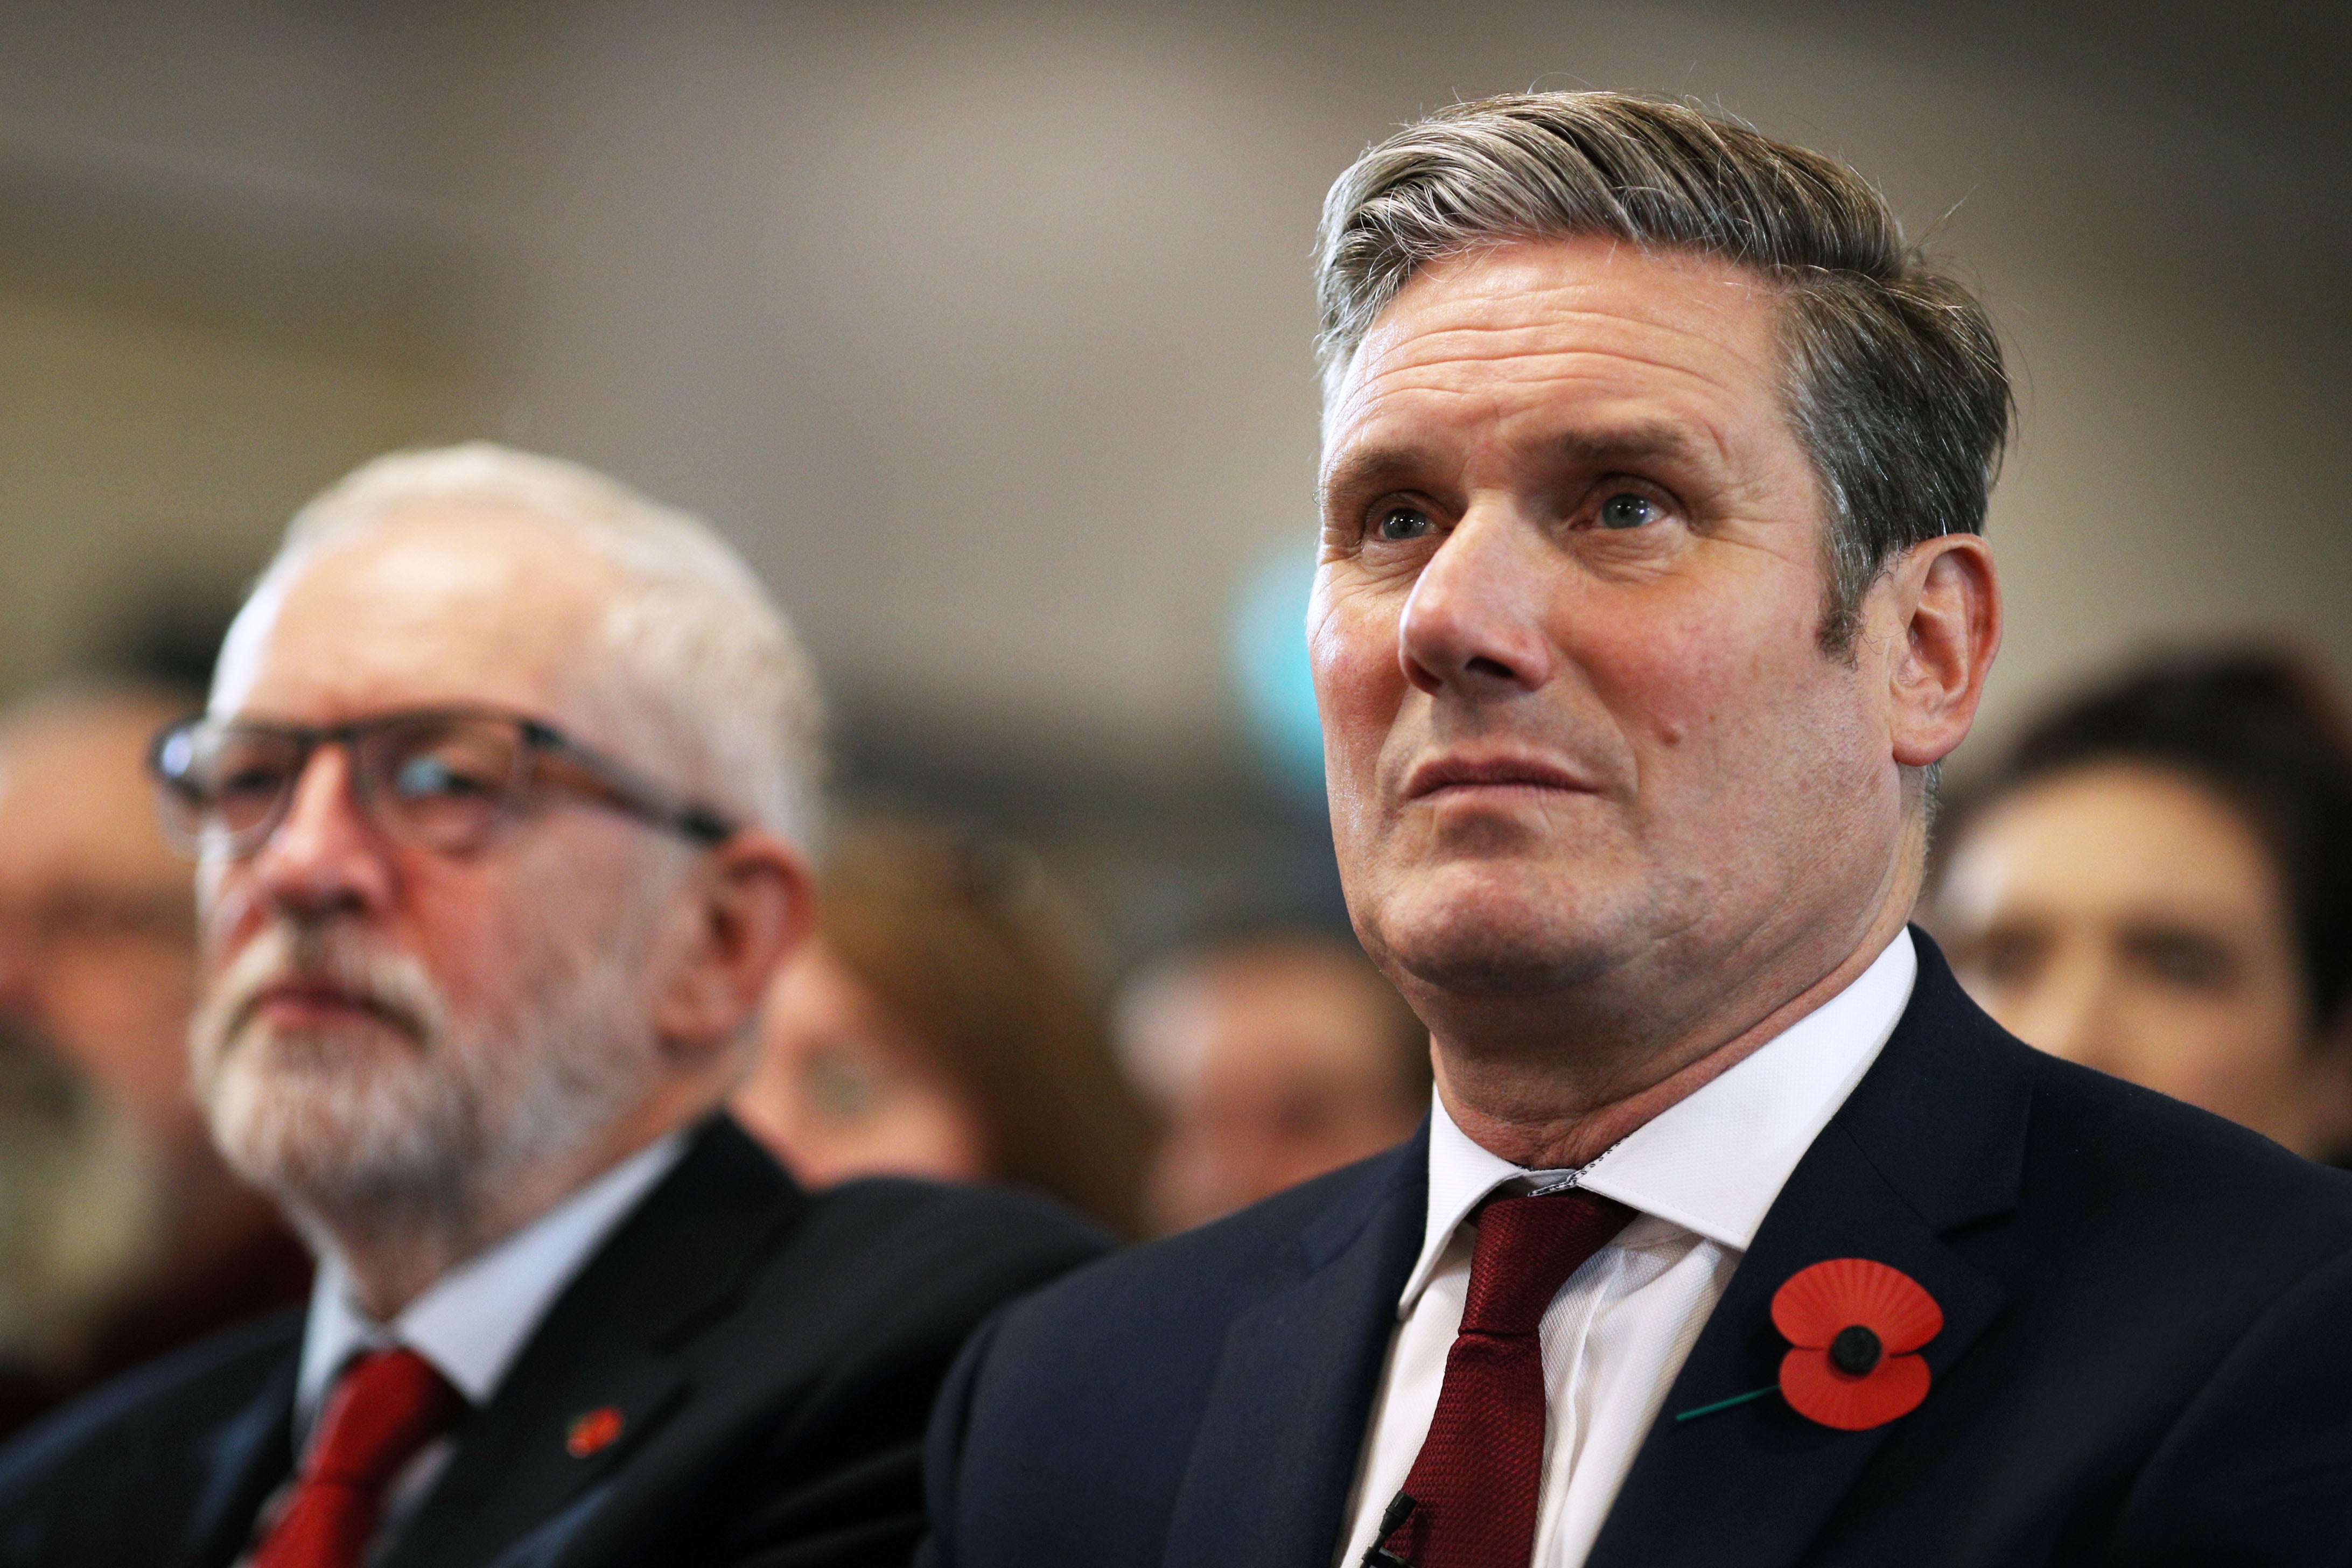 Starmer did what he had to do to survive the Corbyn era